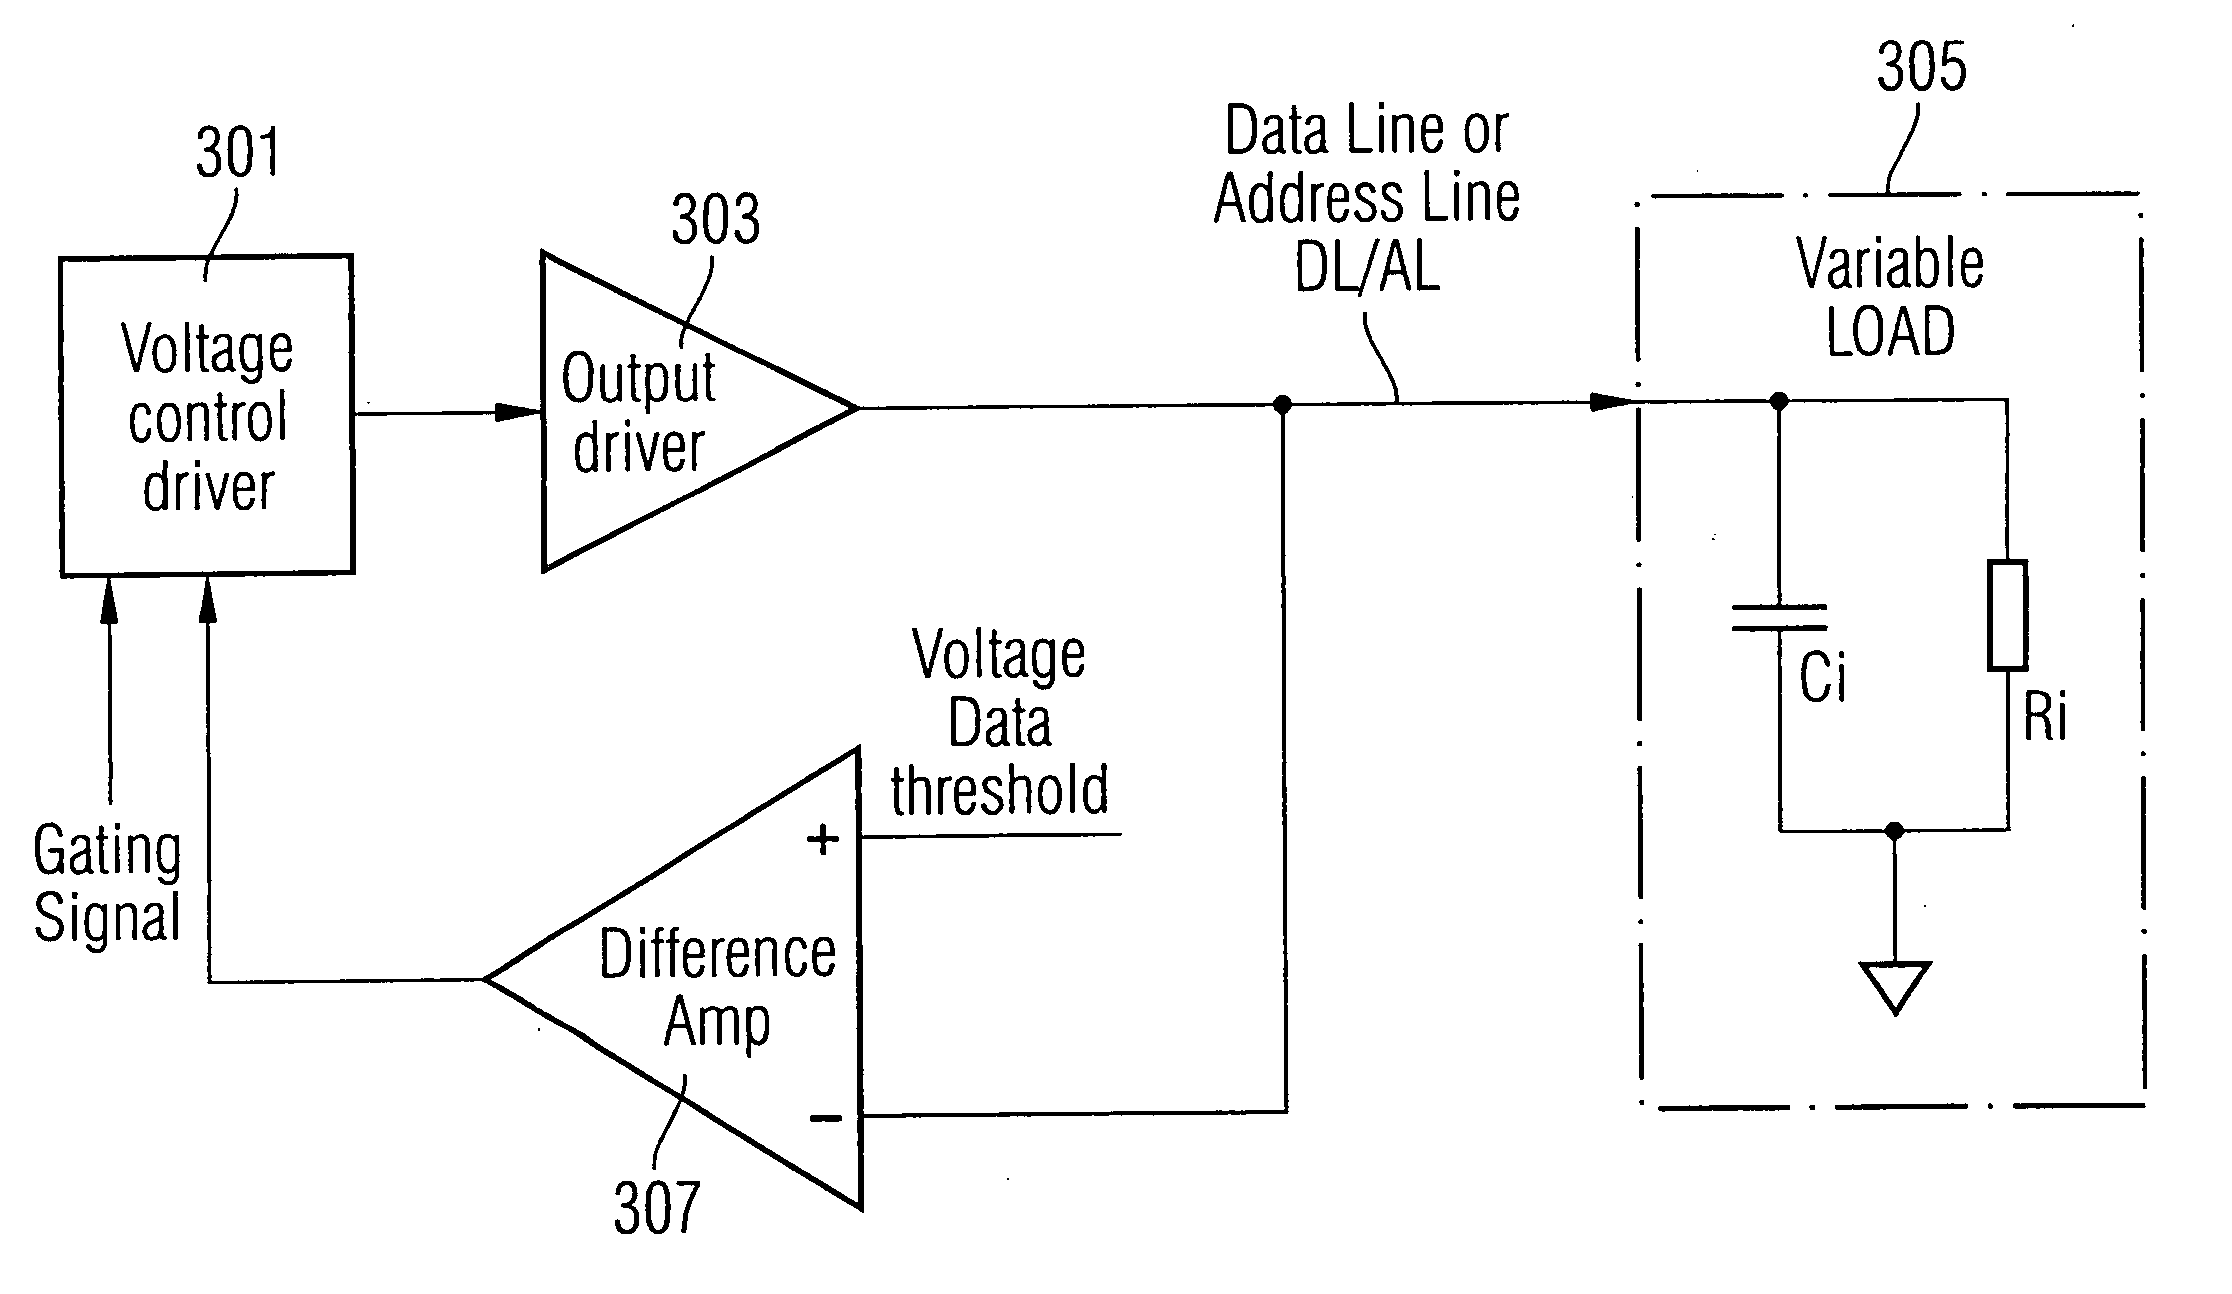 Control of signal line voltages on a bus